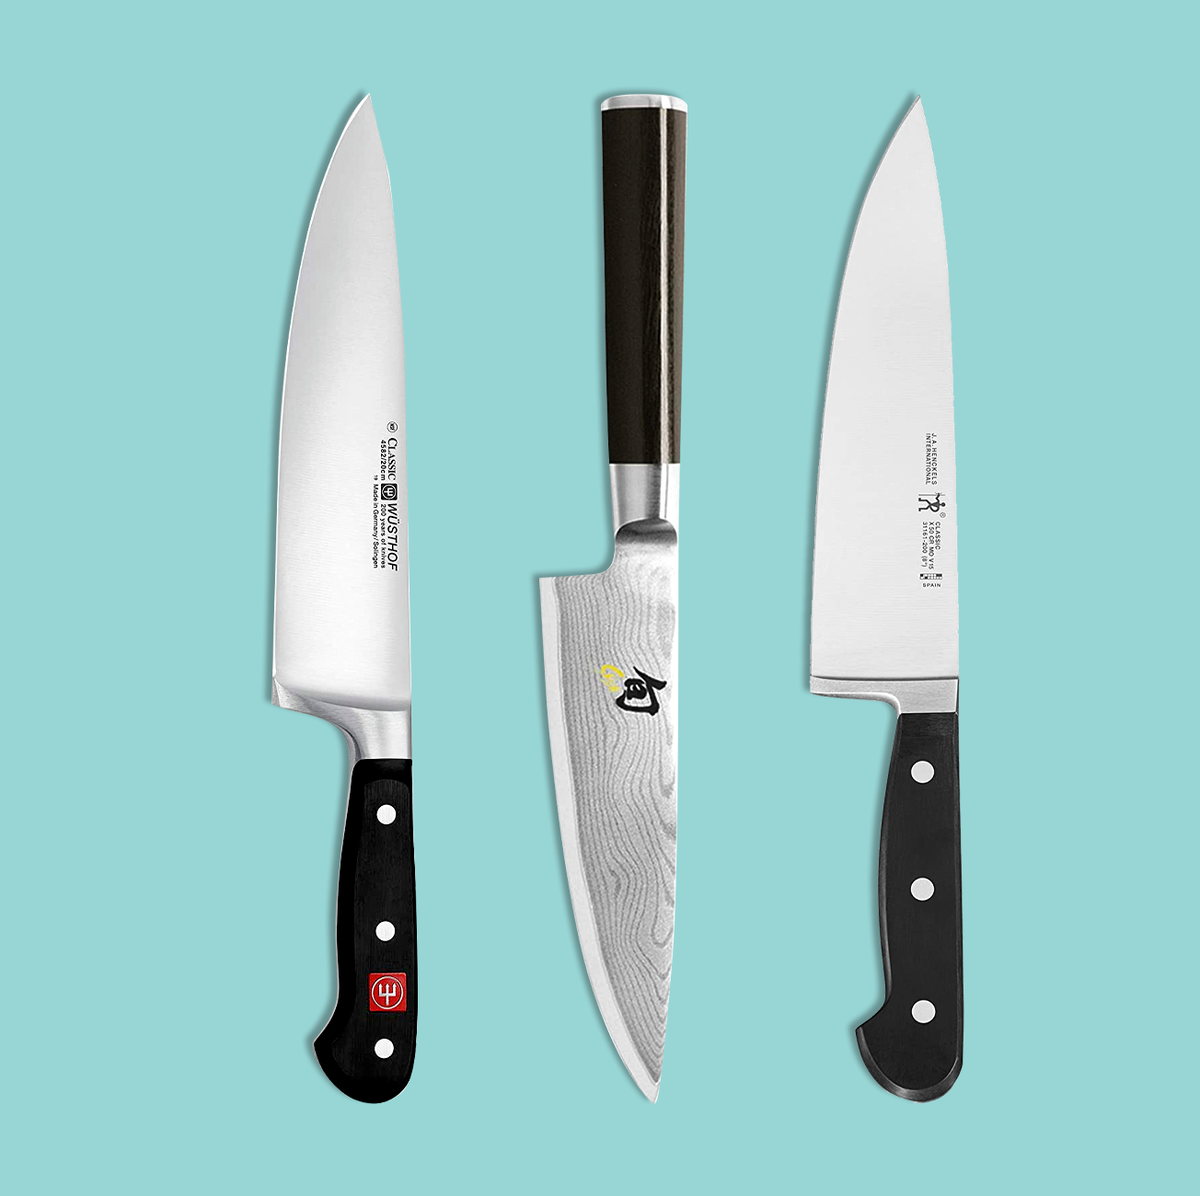 https://hips.hearstapps.com/hmg-prod/images/gh-070722-best-kitchen-knives-1657205375.png?crop=0.652xw:1.00xh;0.175xw,0&resize=1200:*